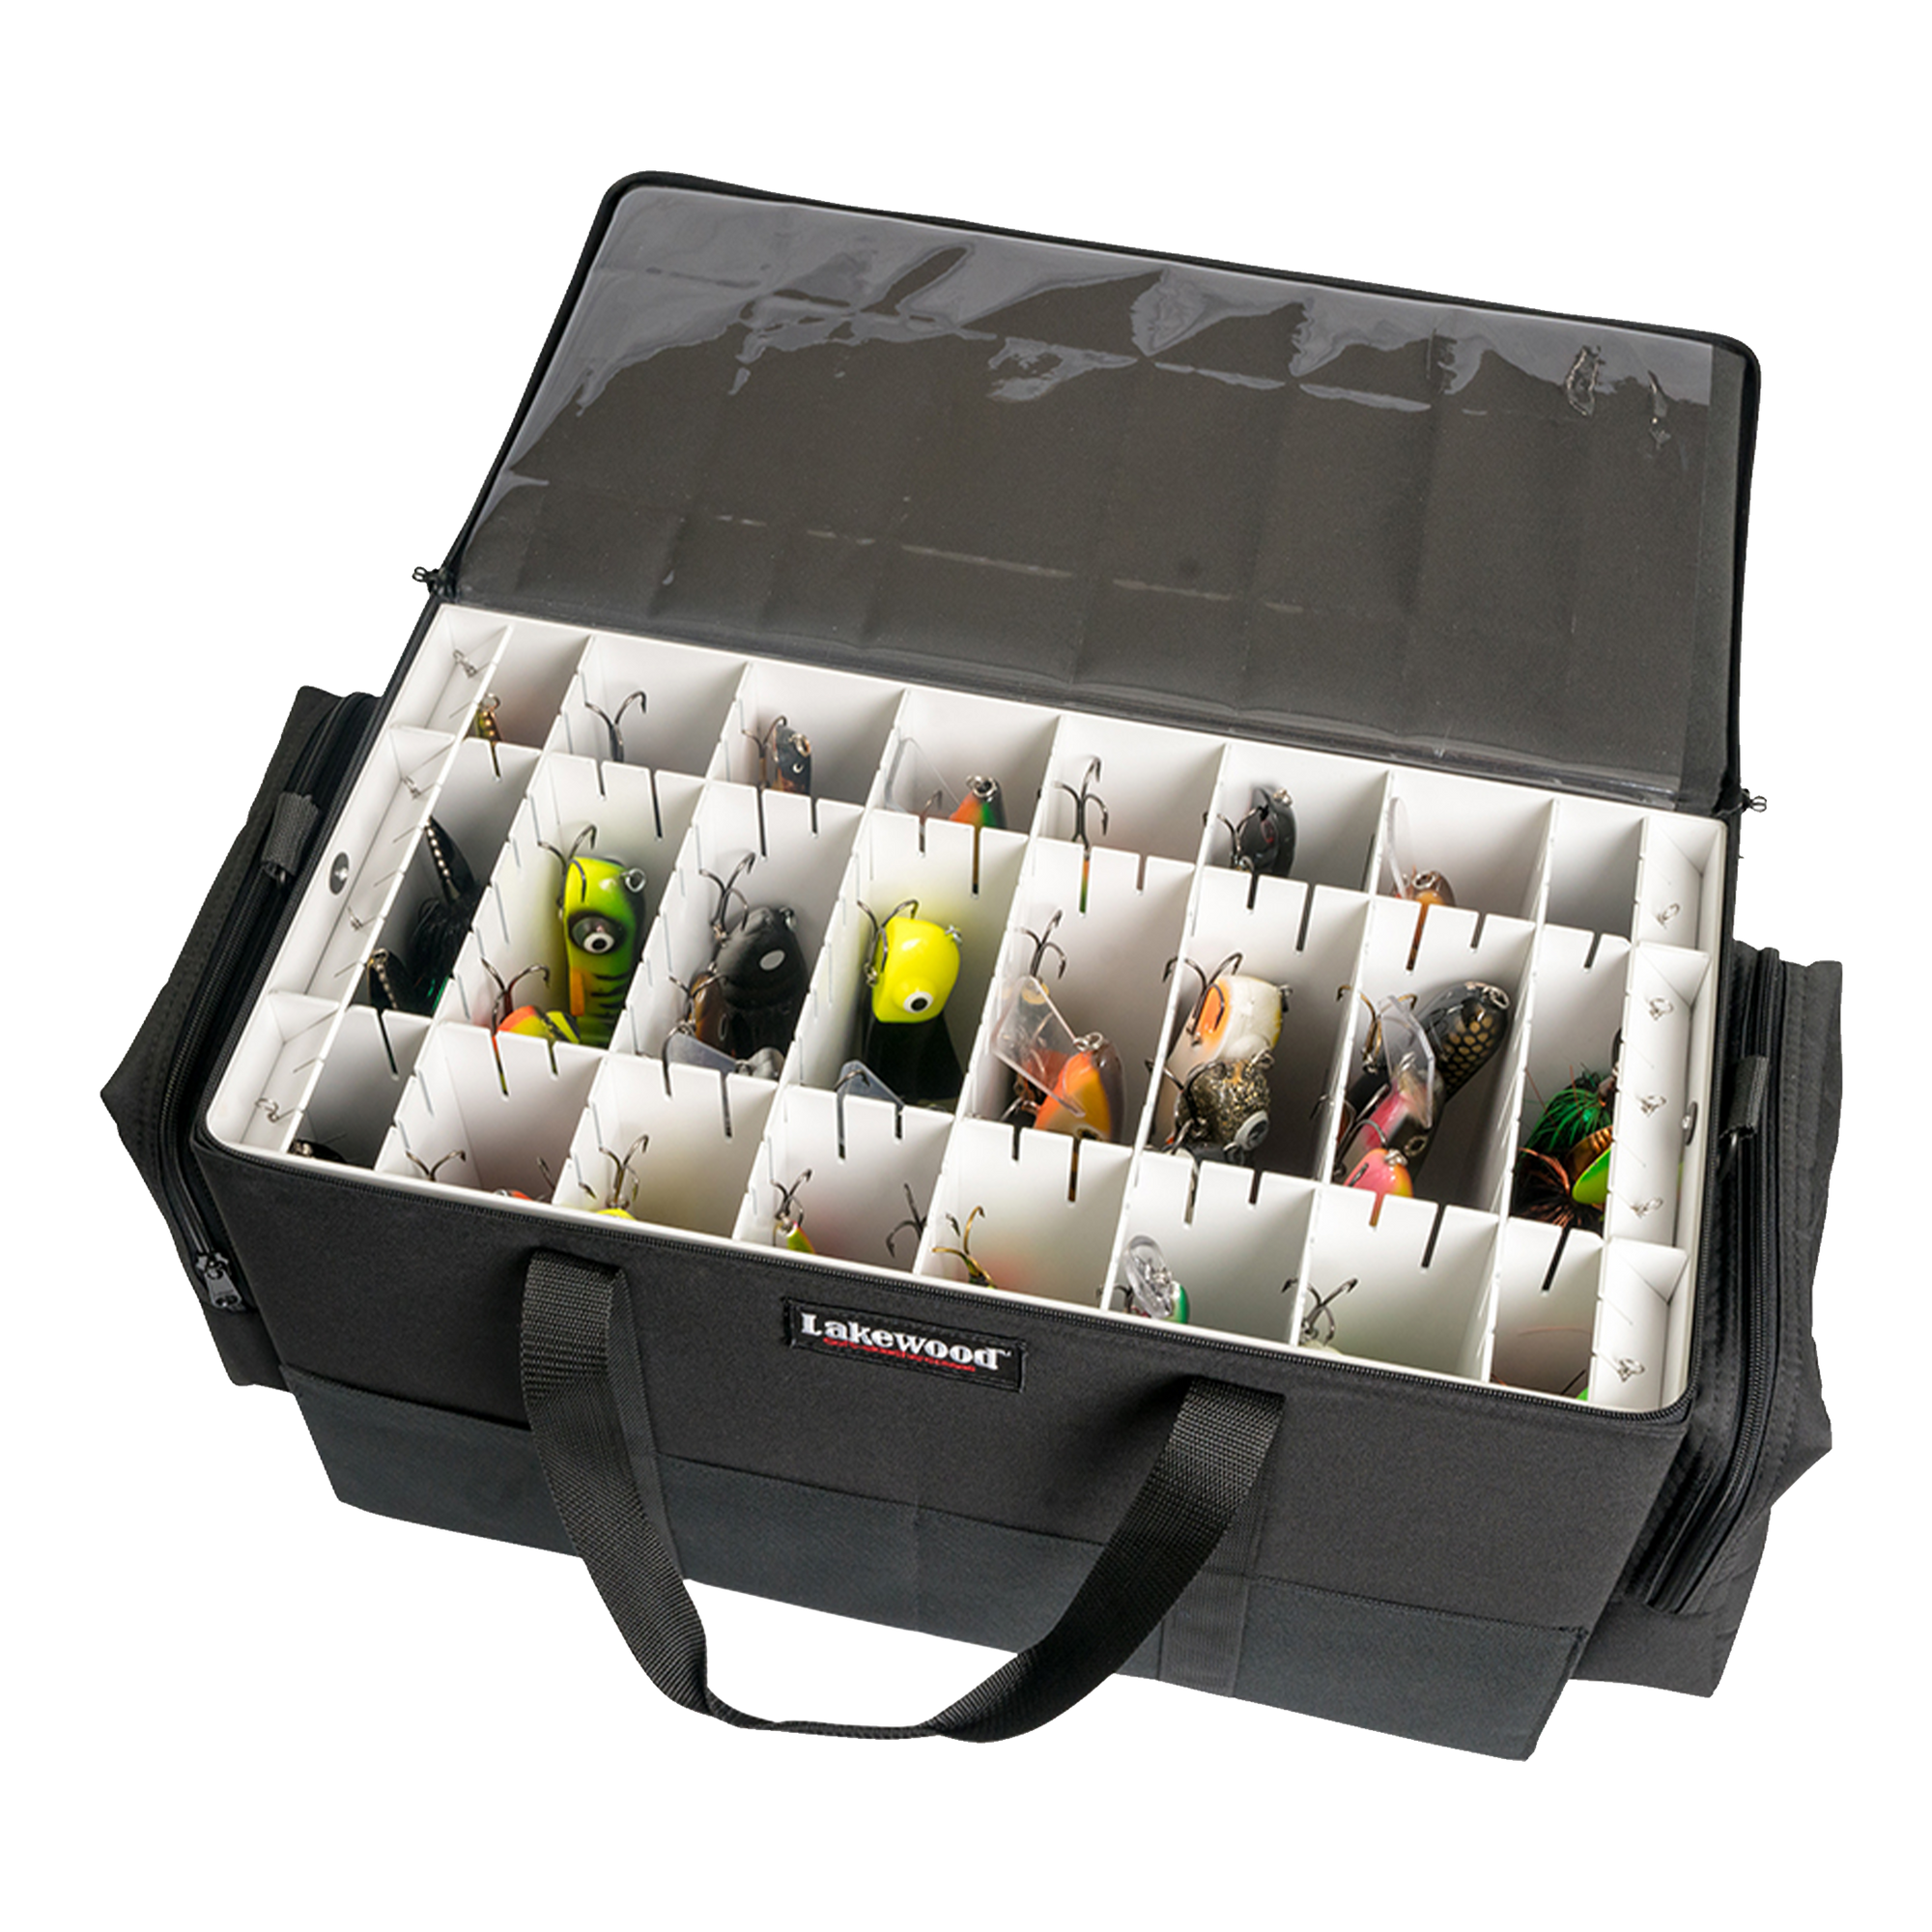 Large Saltwater Tackle Box - Lakewood Products